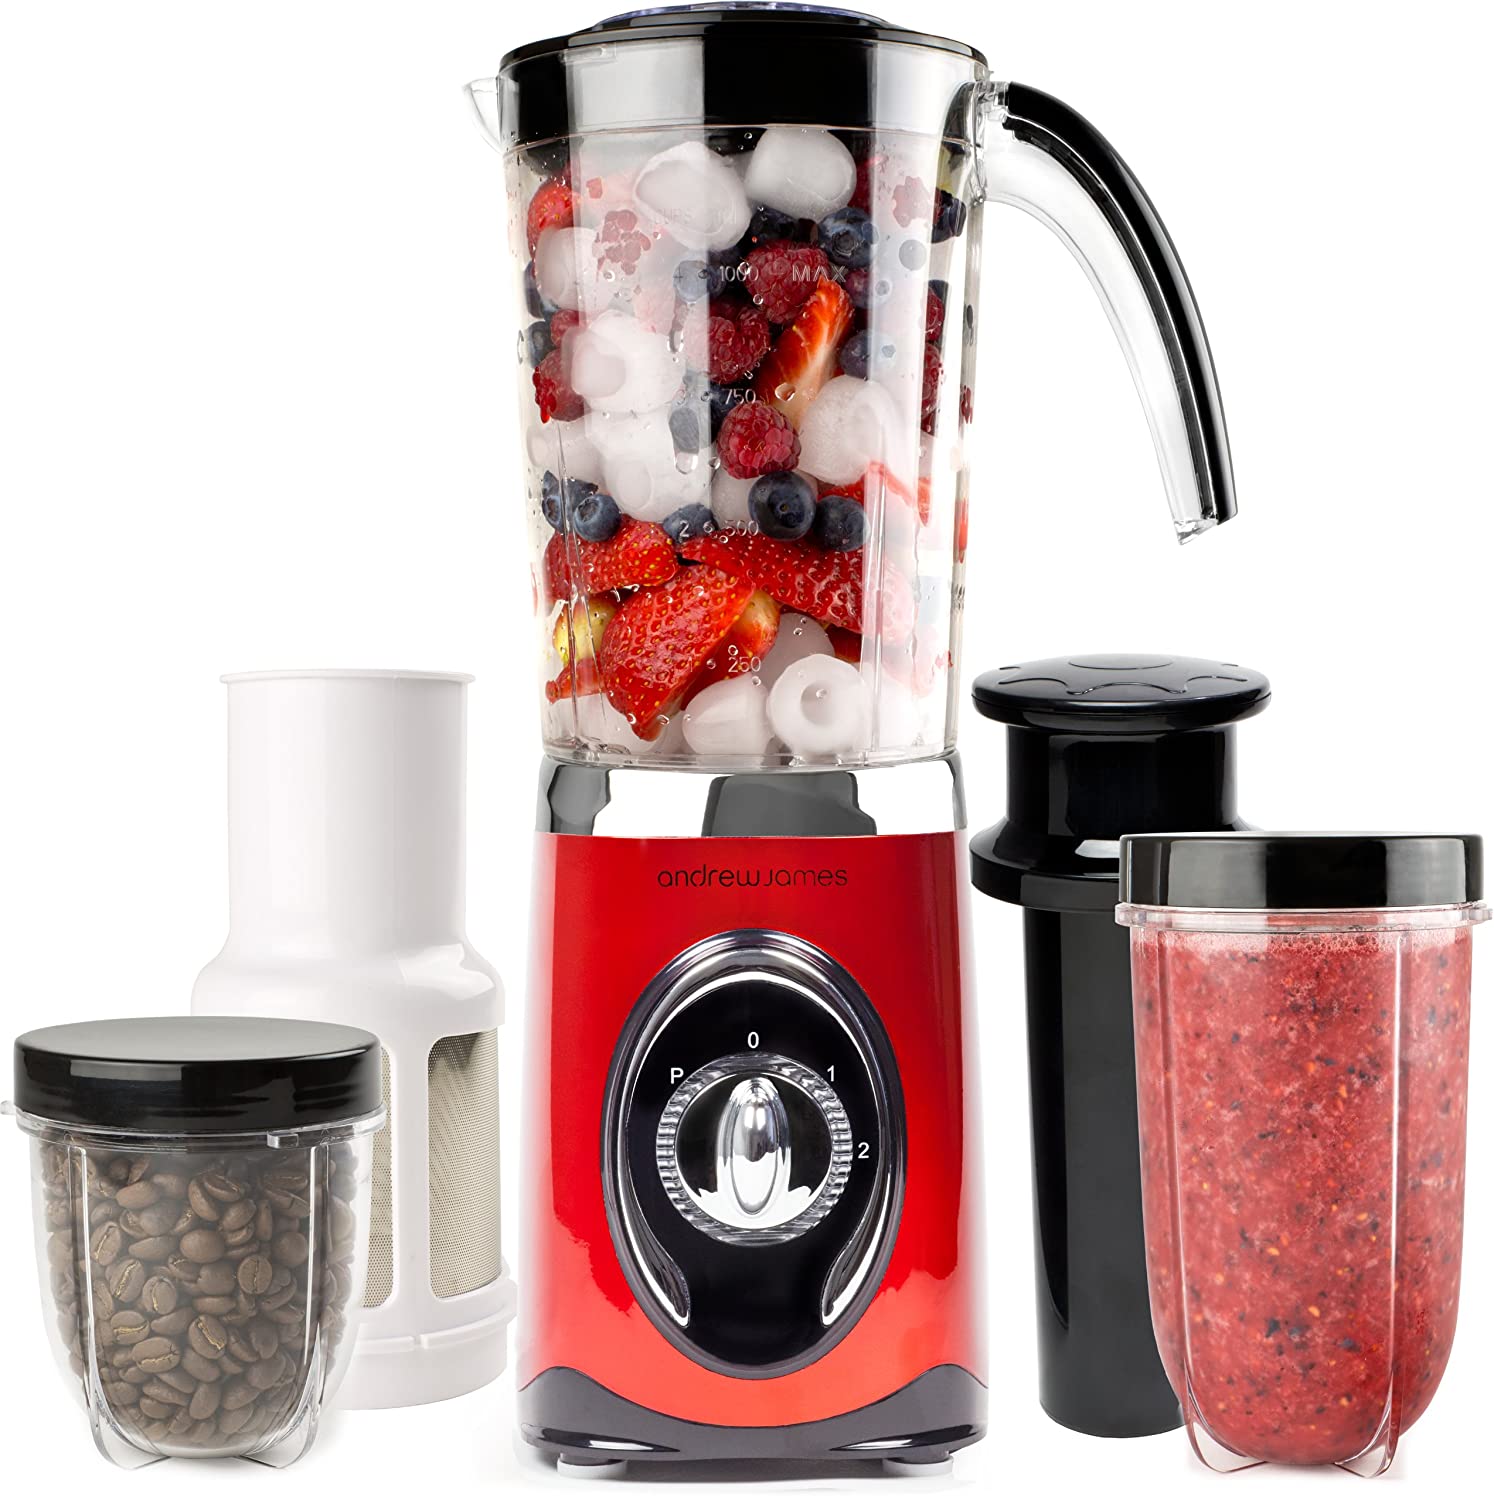 Andrew James 4 in 1 Multifunctional 1 Litre Smoothie Maker With 2 Year ...